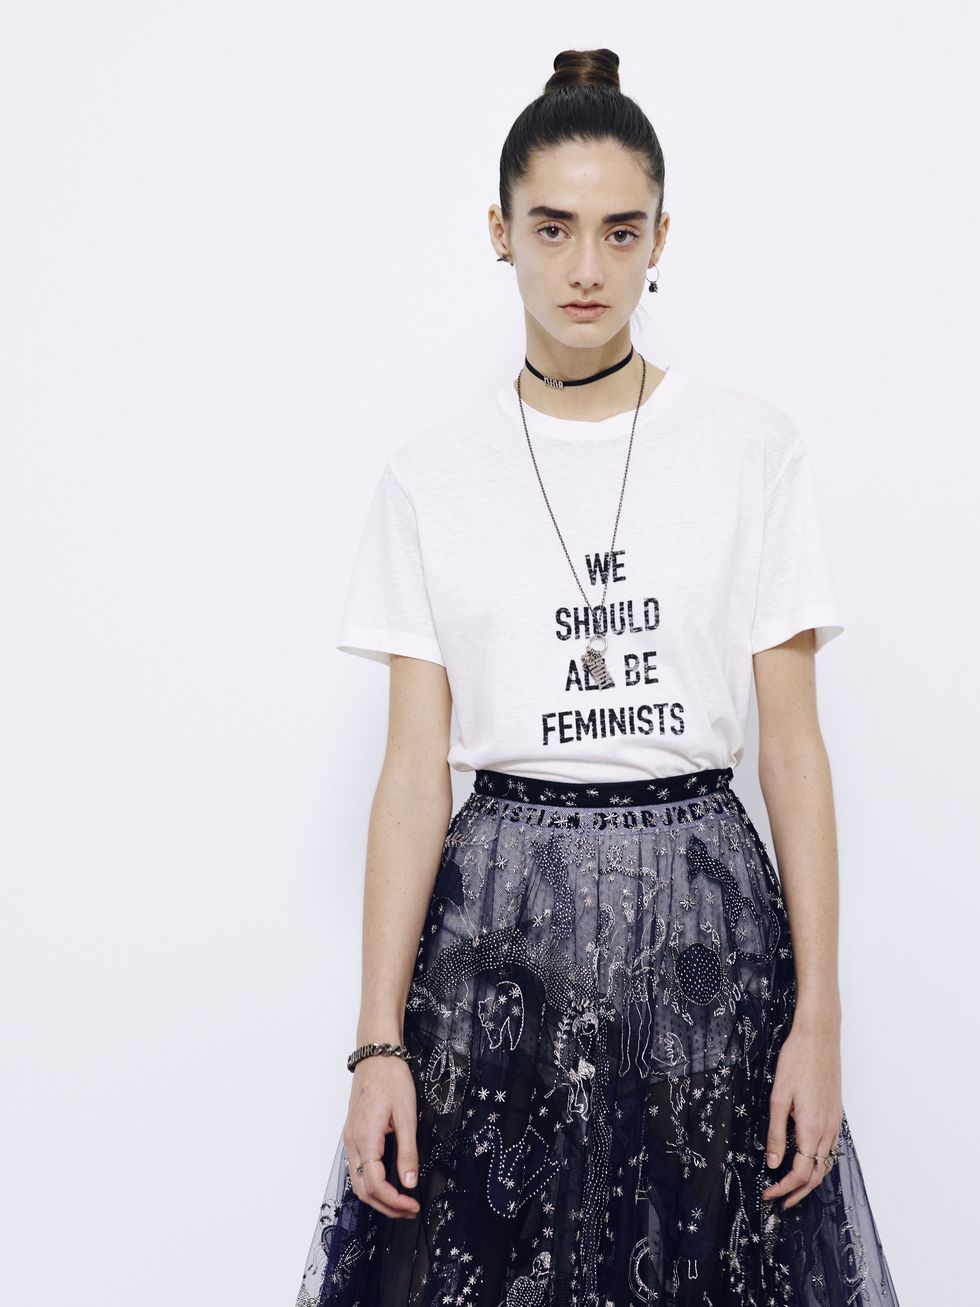 Dior's 'We Should All Be Feminists' t-shirt